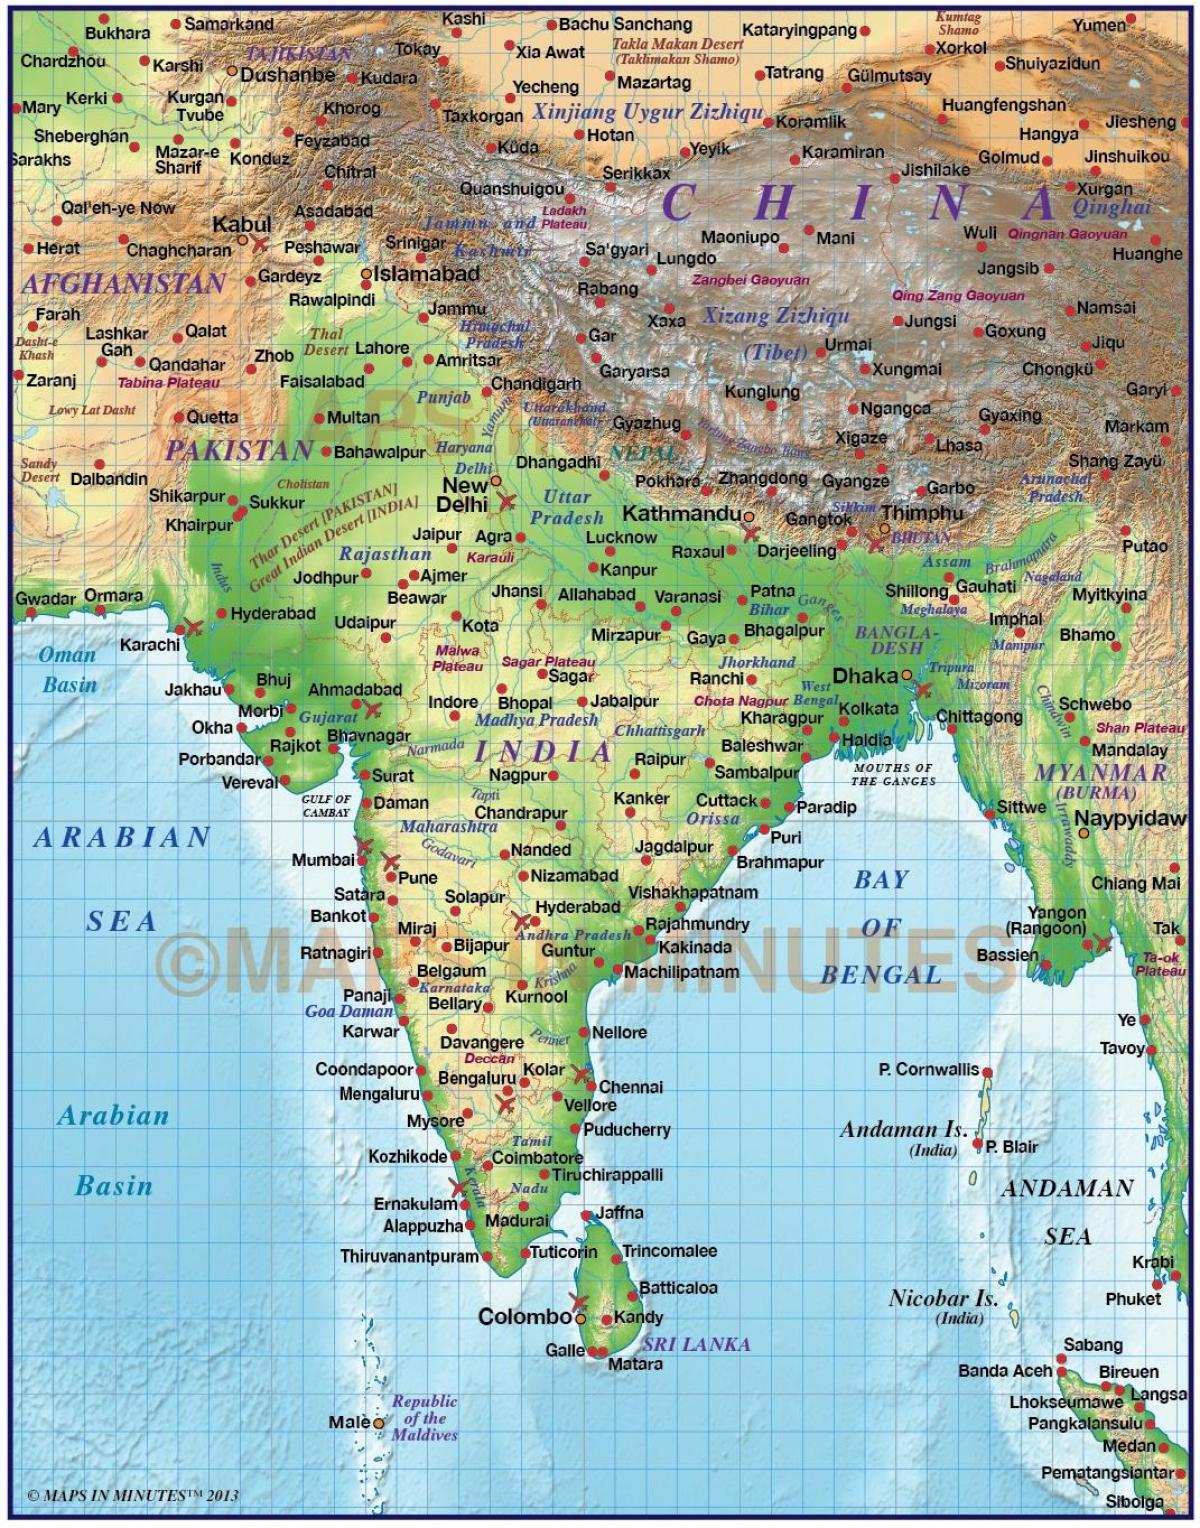 relief map of India